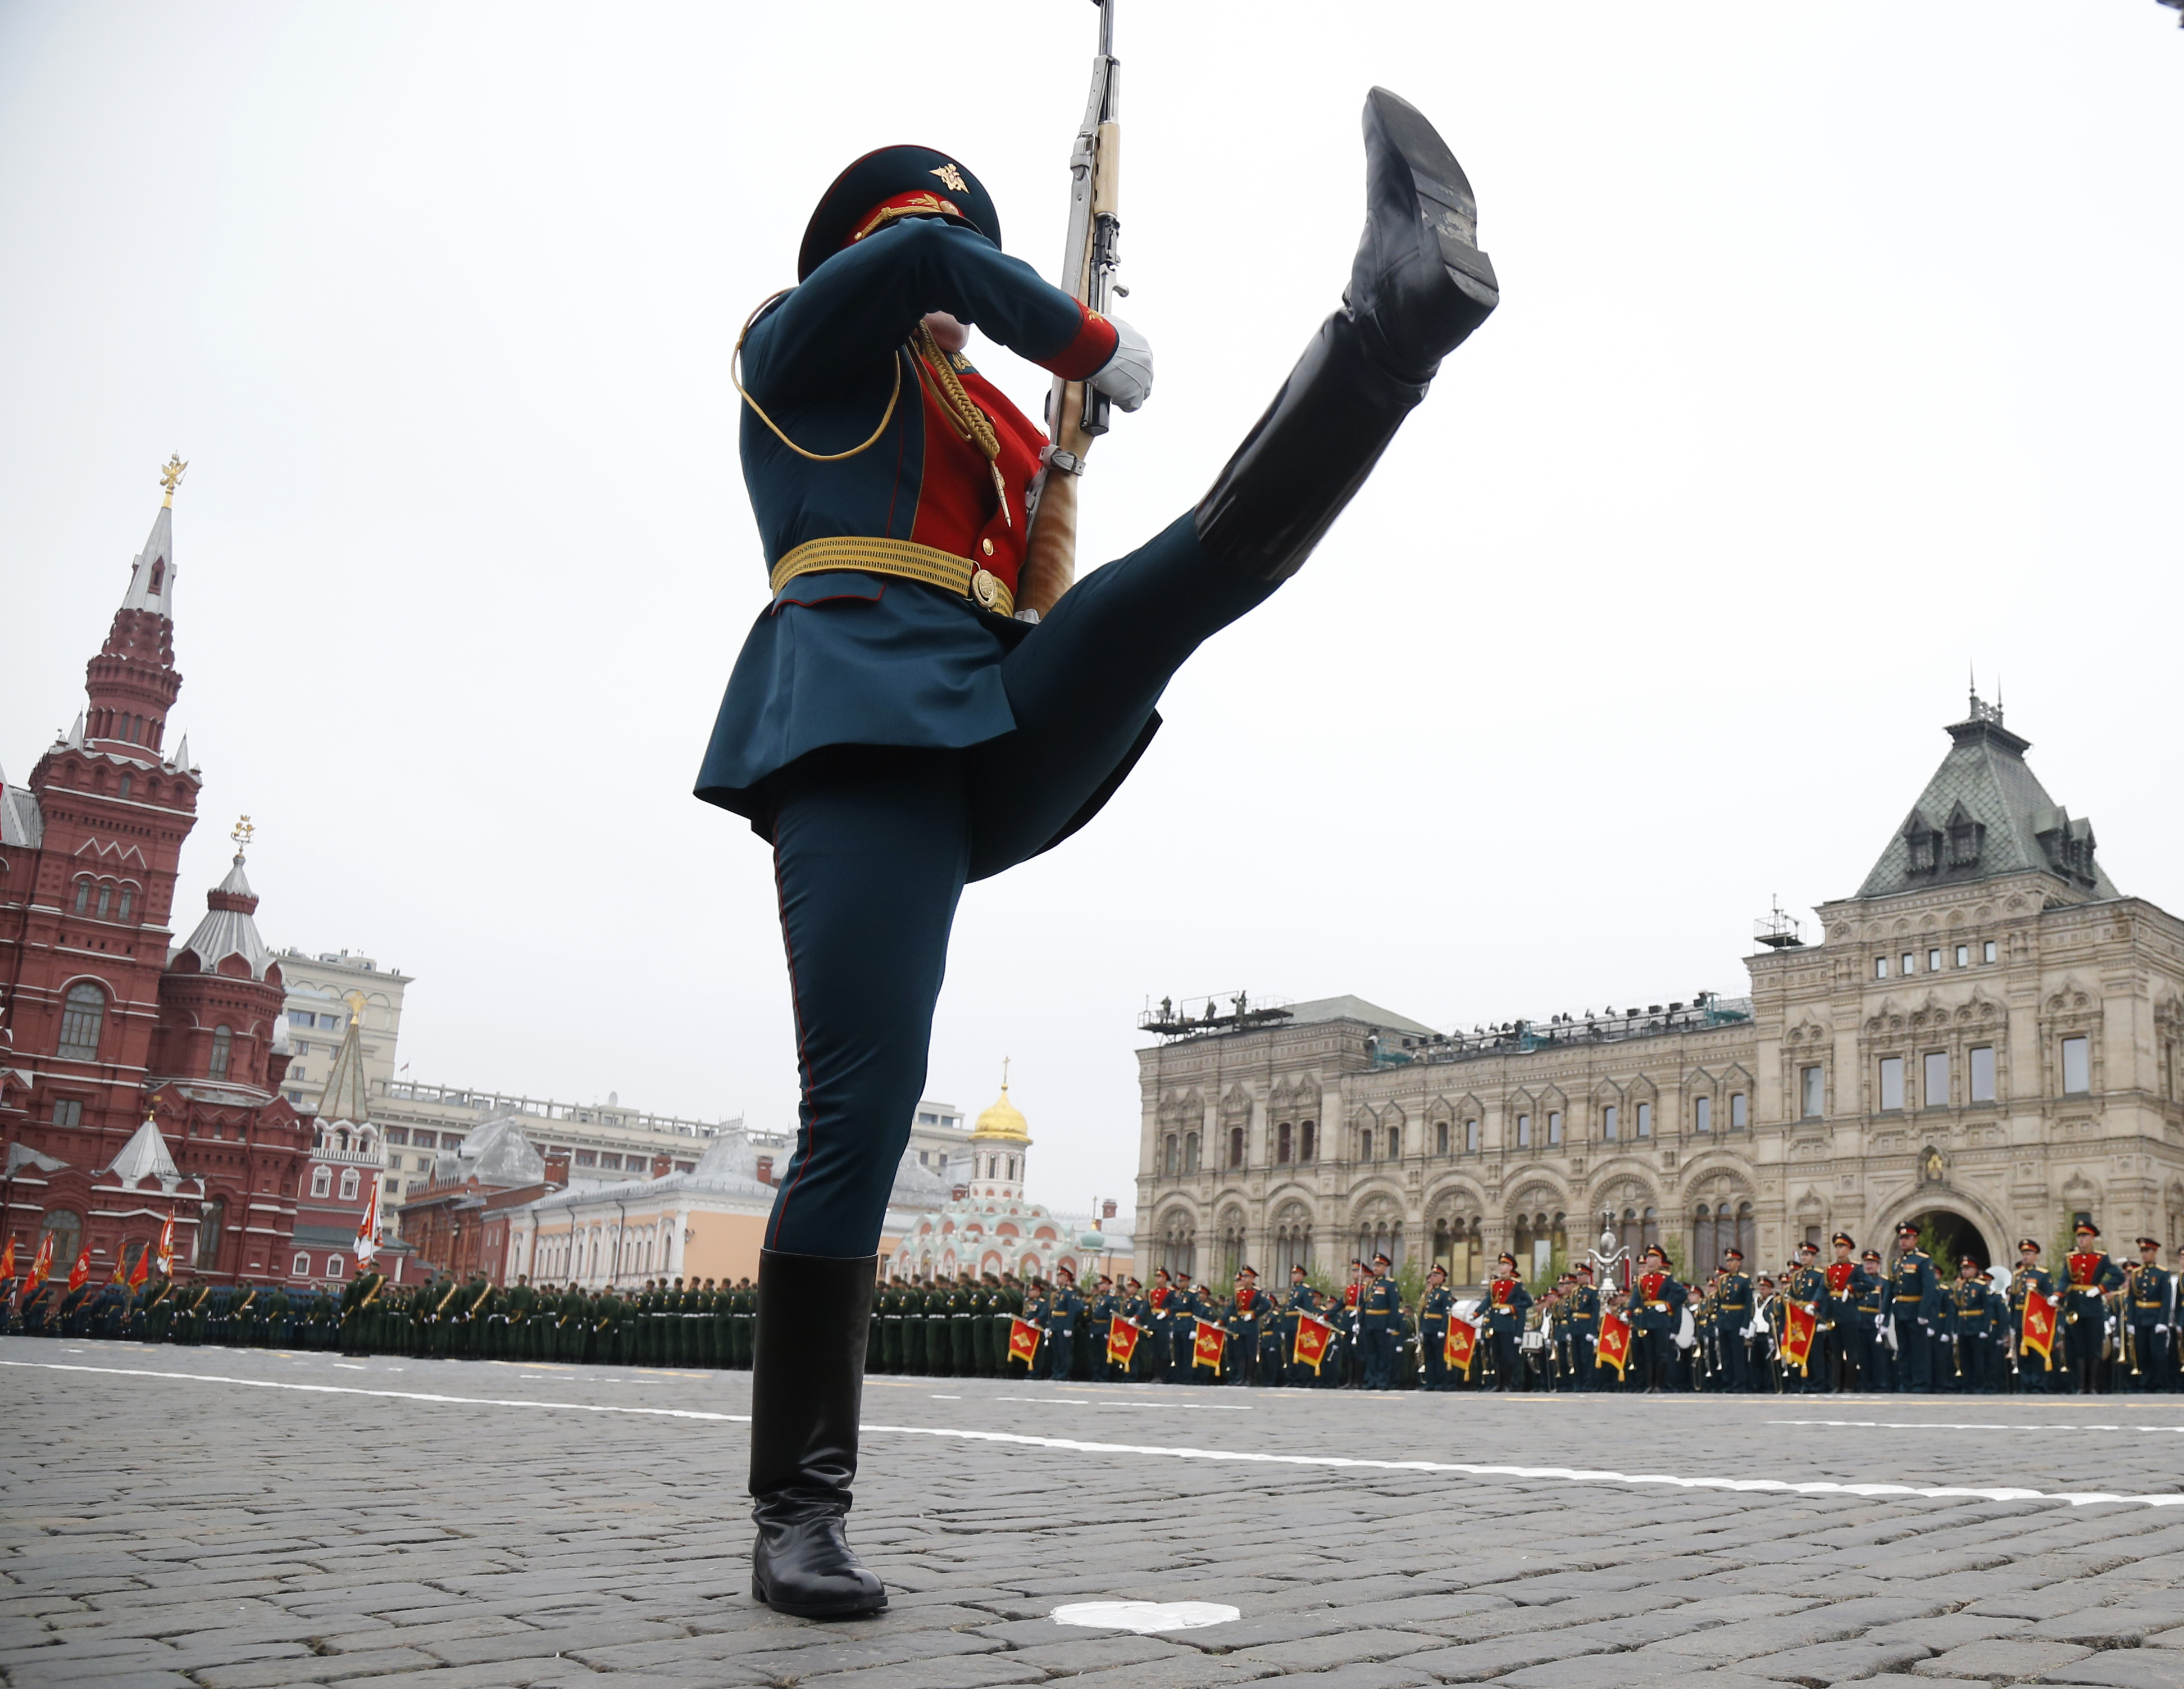 A honour guard takes position during the Victory Day military parade to celebrate 74 years since the victory in WWII in Red Square in Moscow, Russia, Thursday, May 9, 2019. (AP Photo/Alexander Zemlianichenko)